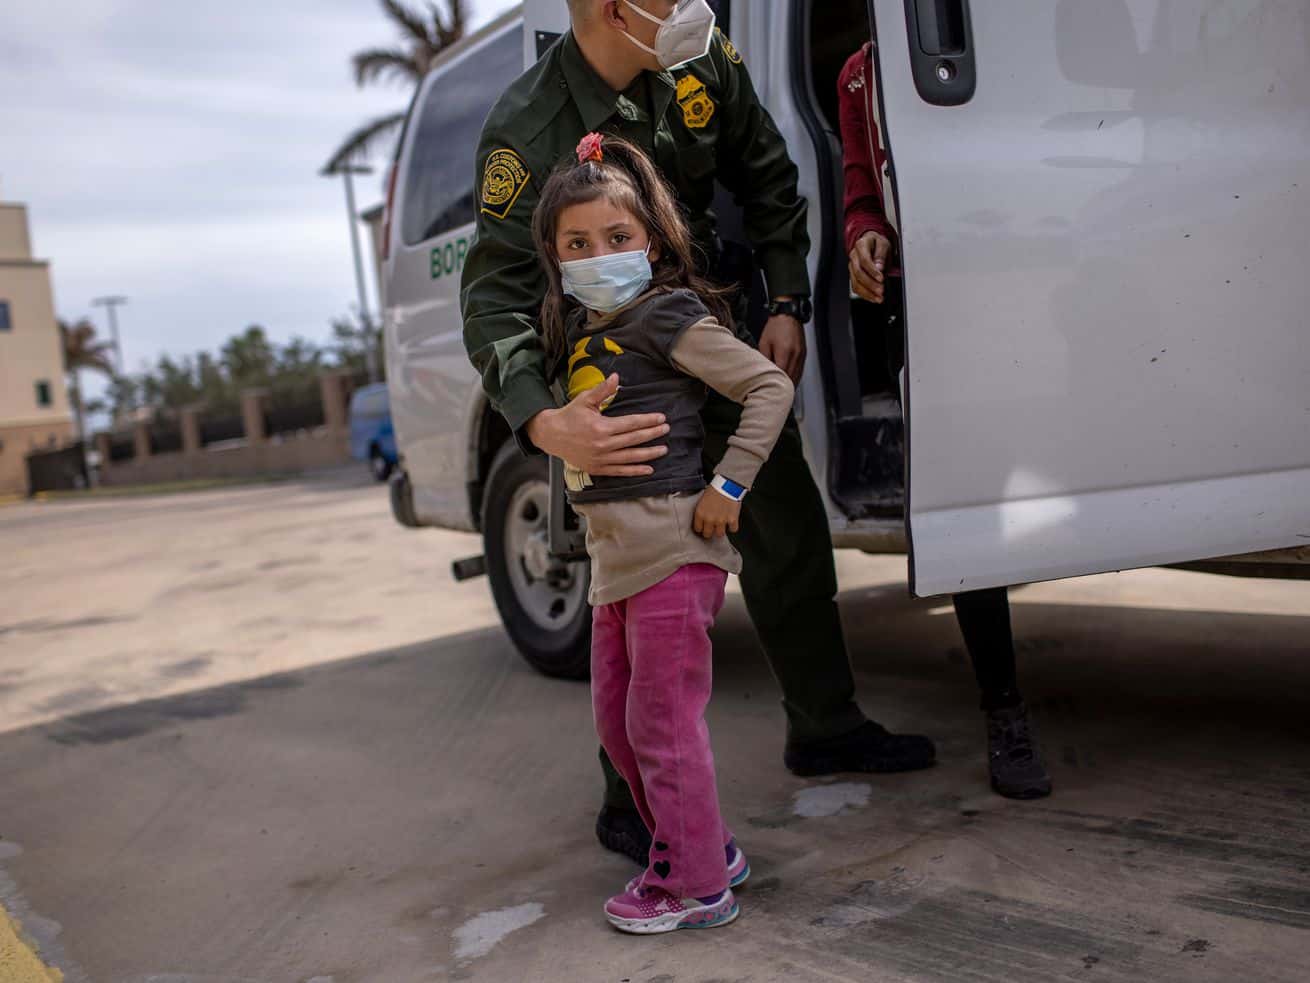 Biden’s border policies are under scrutiny. His administration is racing to find solutions.